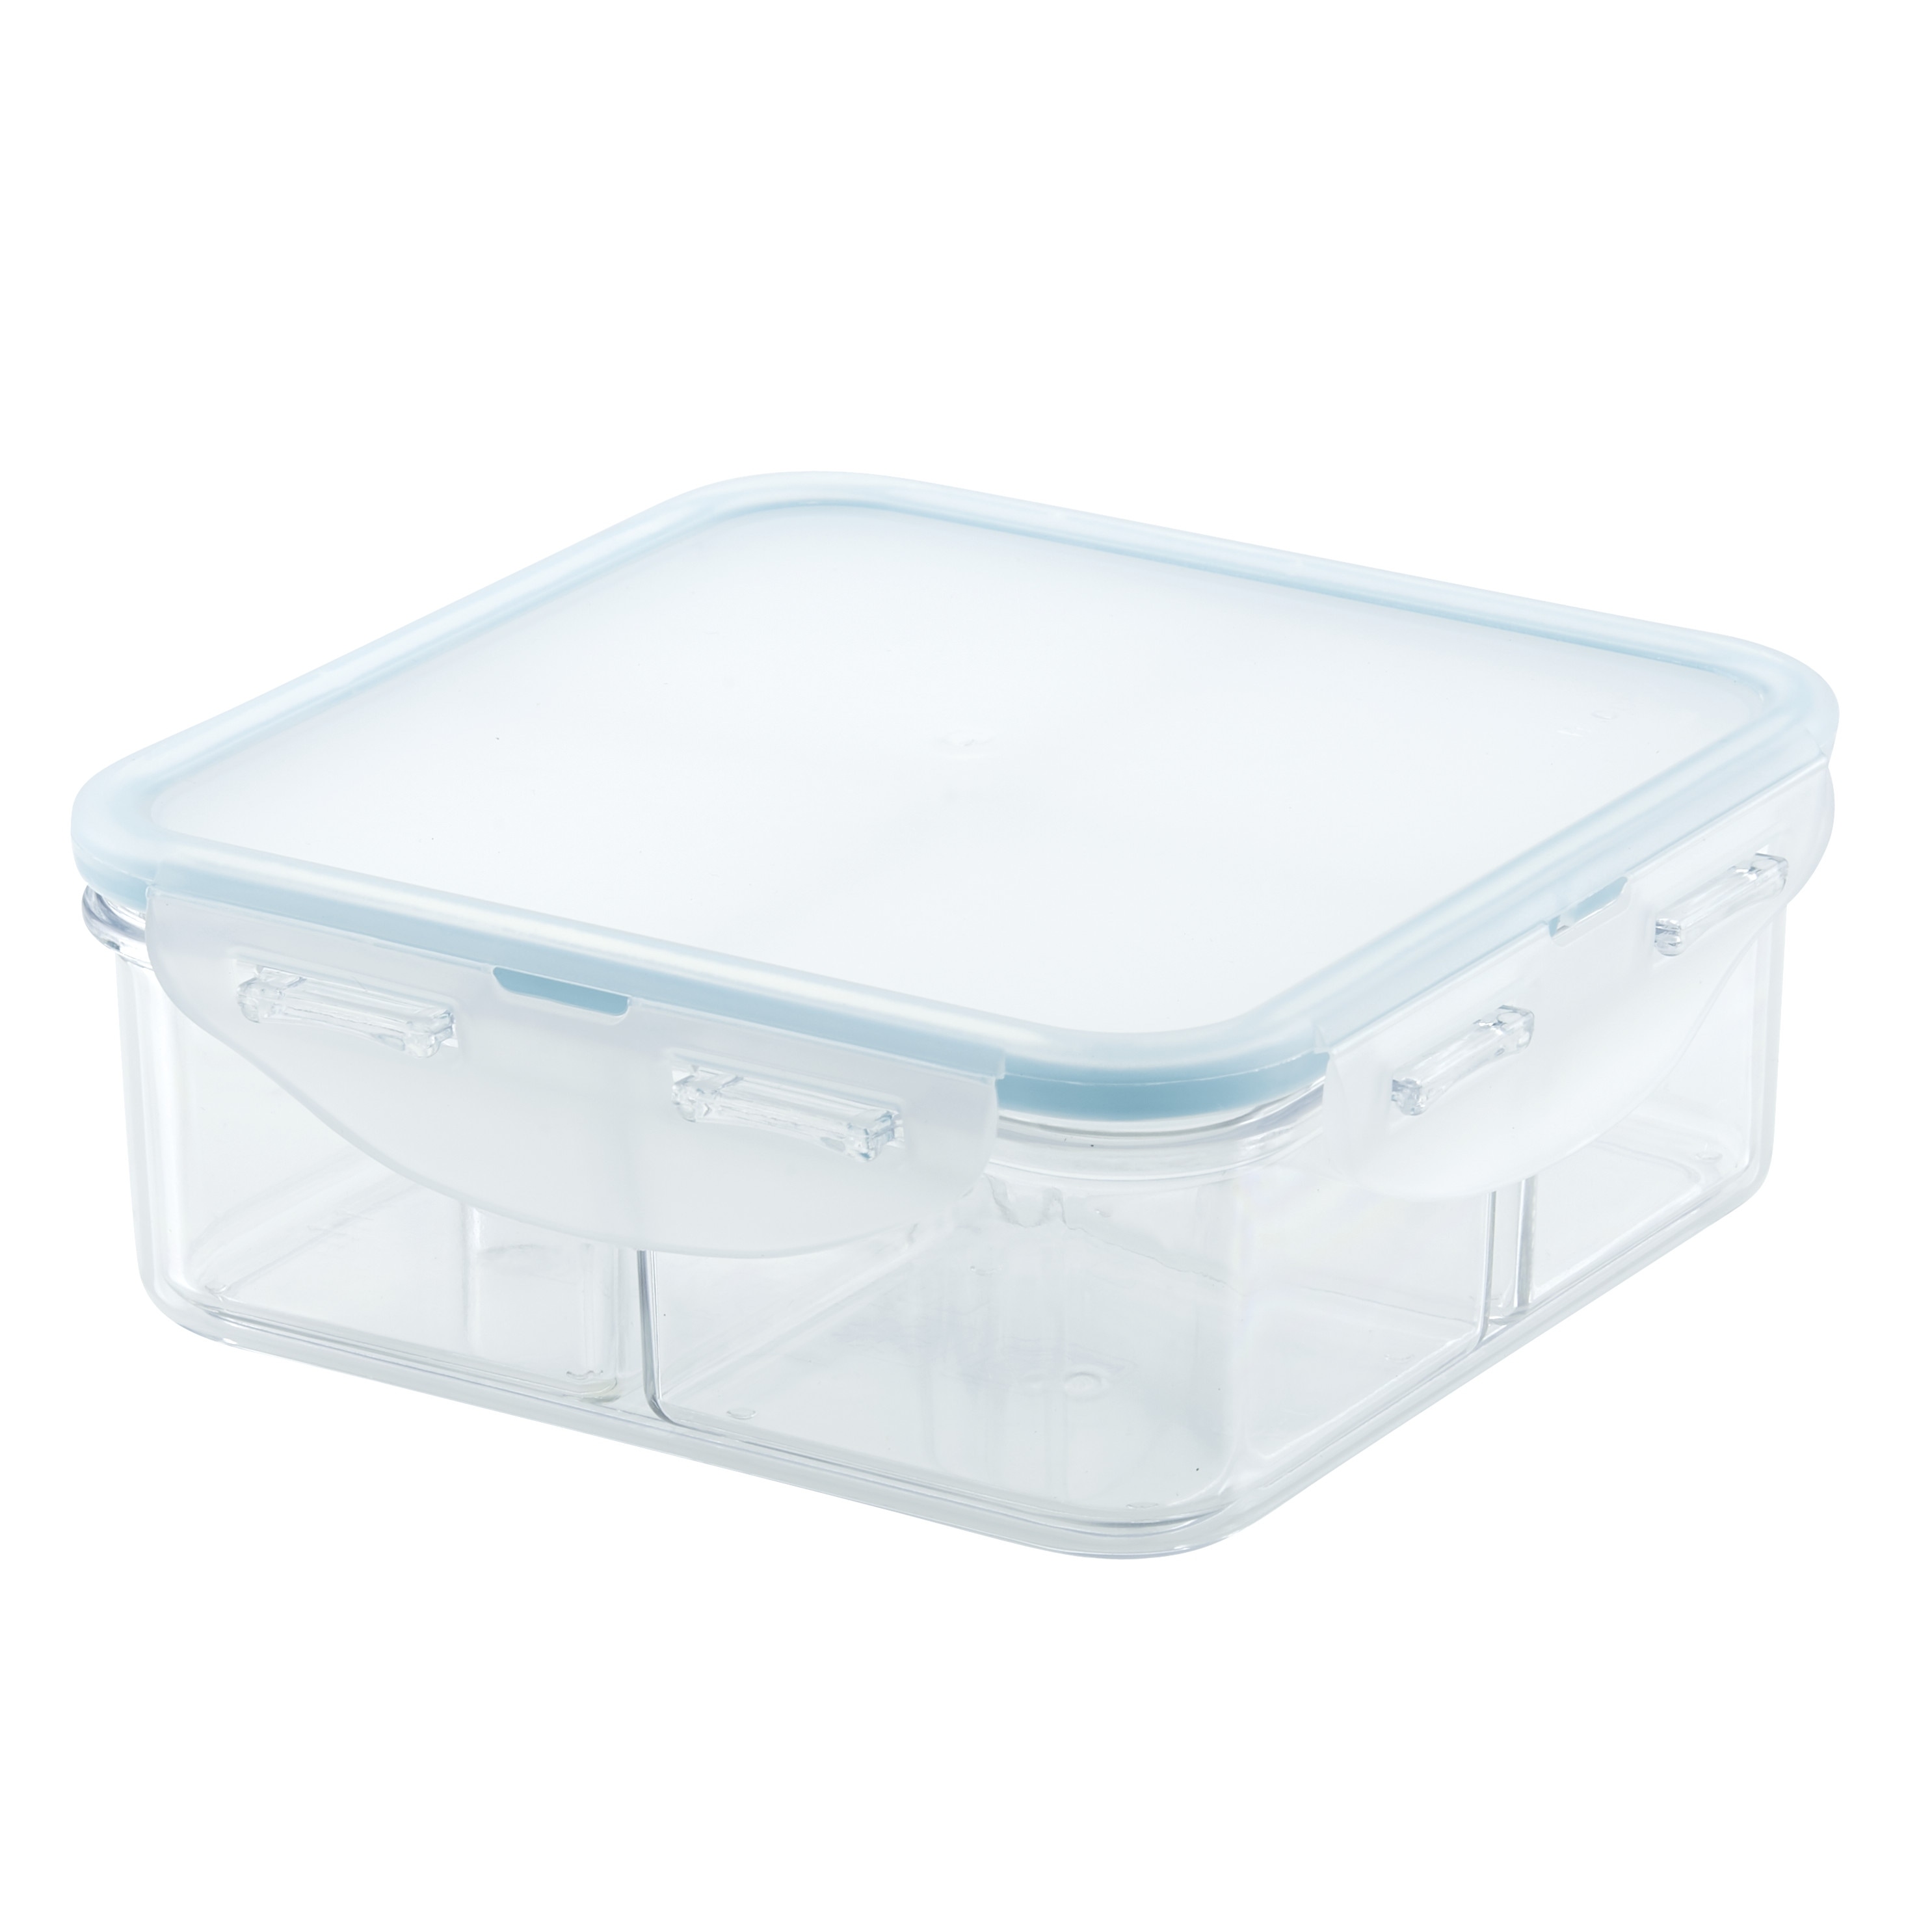 https://ak1.ostkcdn.com/images/products/is/images/direct/e1d57816a12ba1f53e39216e6e5c40e8885934b0/LocknLock-Purely-Better-Square-Food-Storage-Containers-with-Dividers%2C-29-Ounce%2C-Set-of-2.jpg